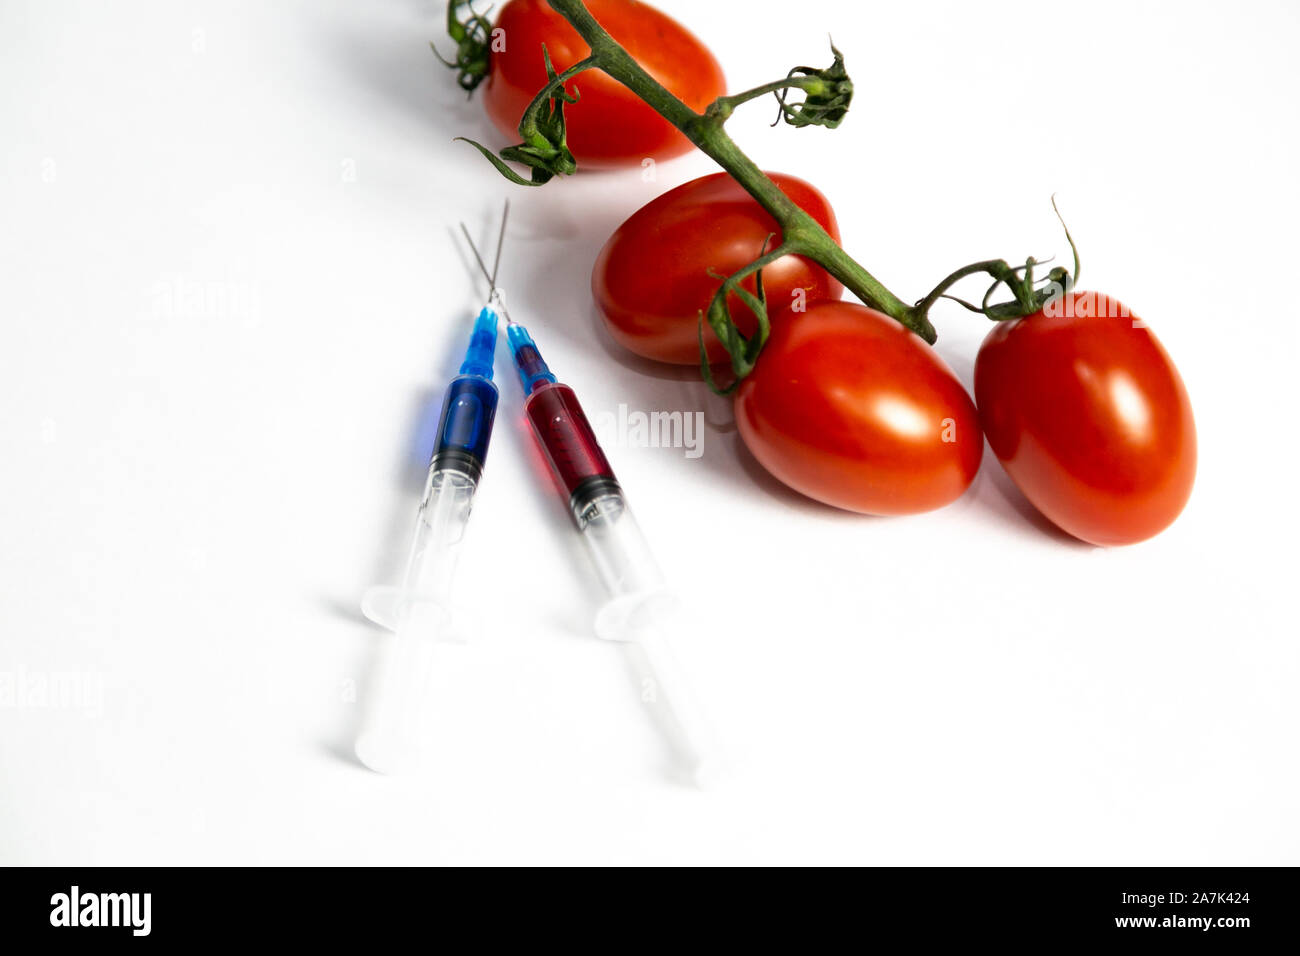 Syringes with chemicals for fertilizing tomatoes on a white background. Stock Photo